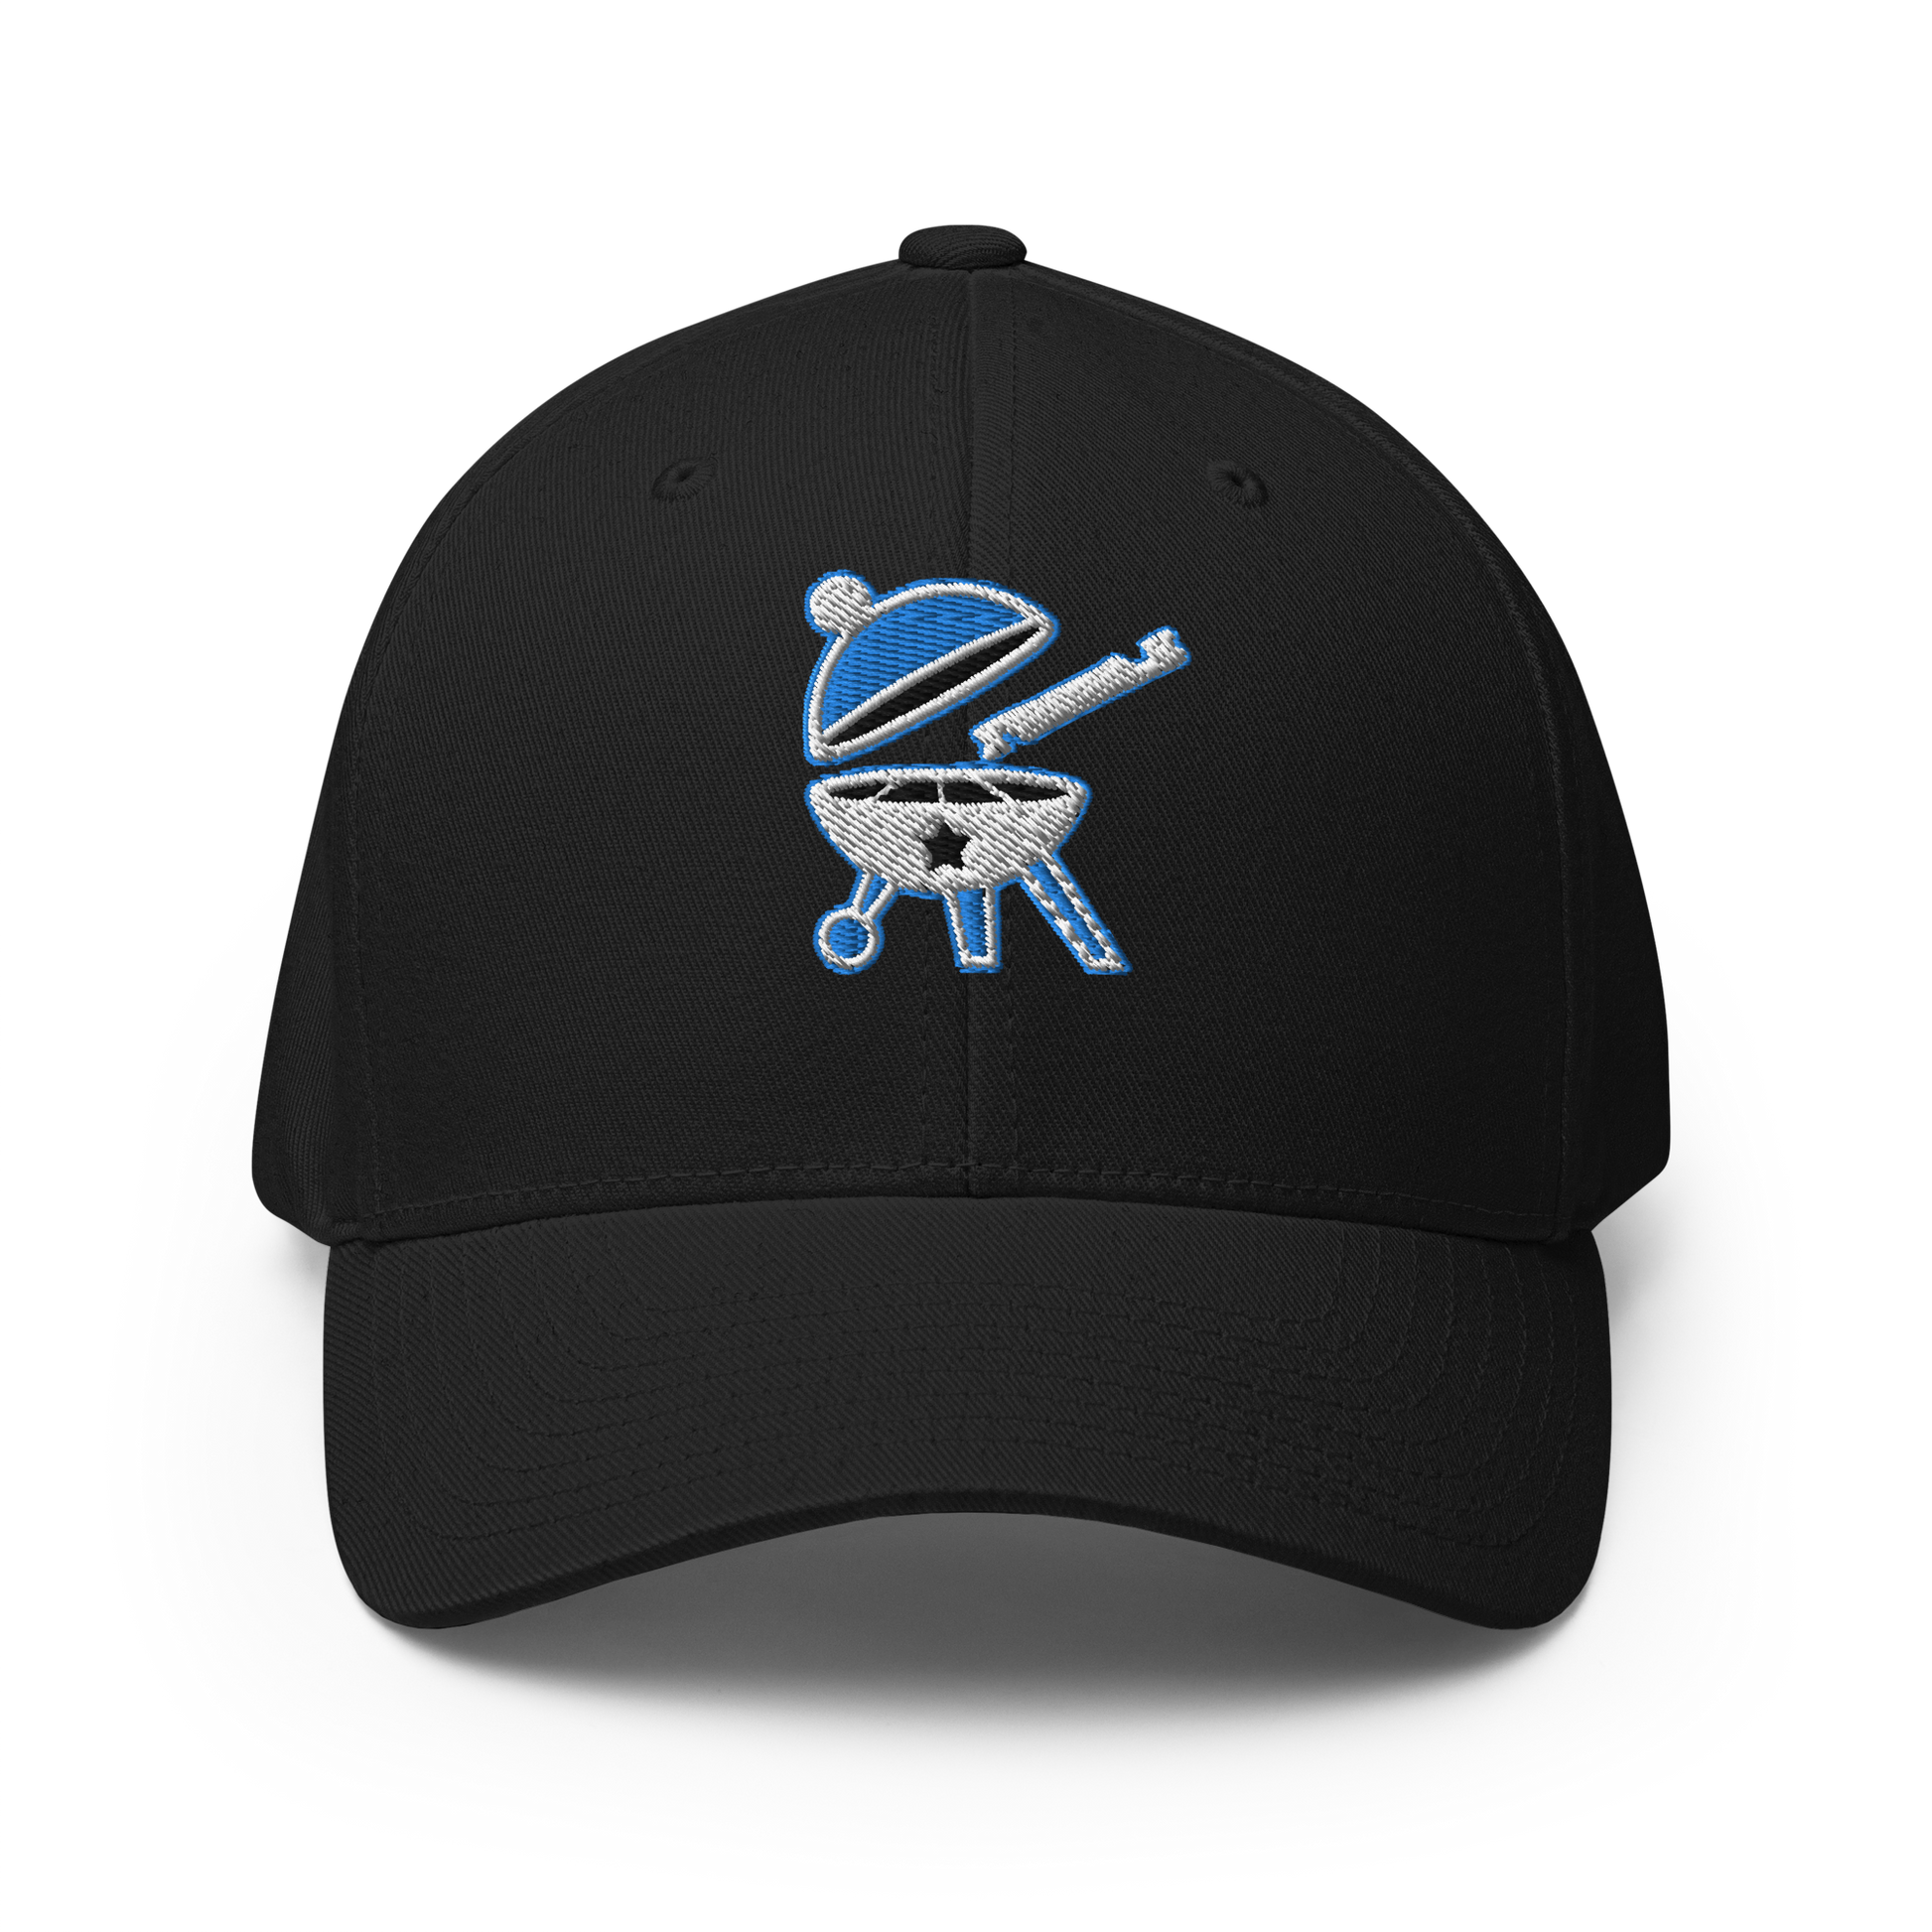 Black baseball cap with the BBQ Pic logo on it which is a round, open BBQ with a BBQ Pic about to clean it.